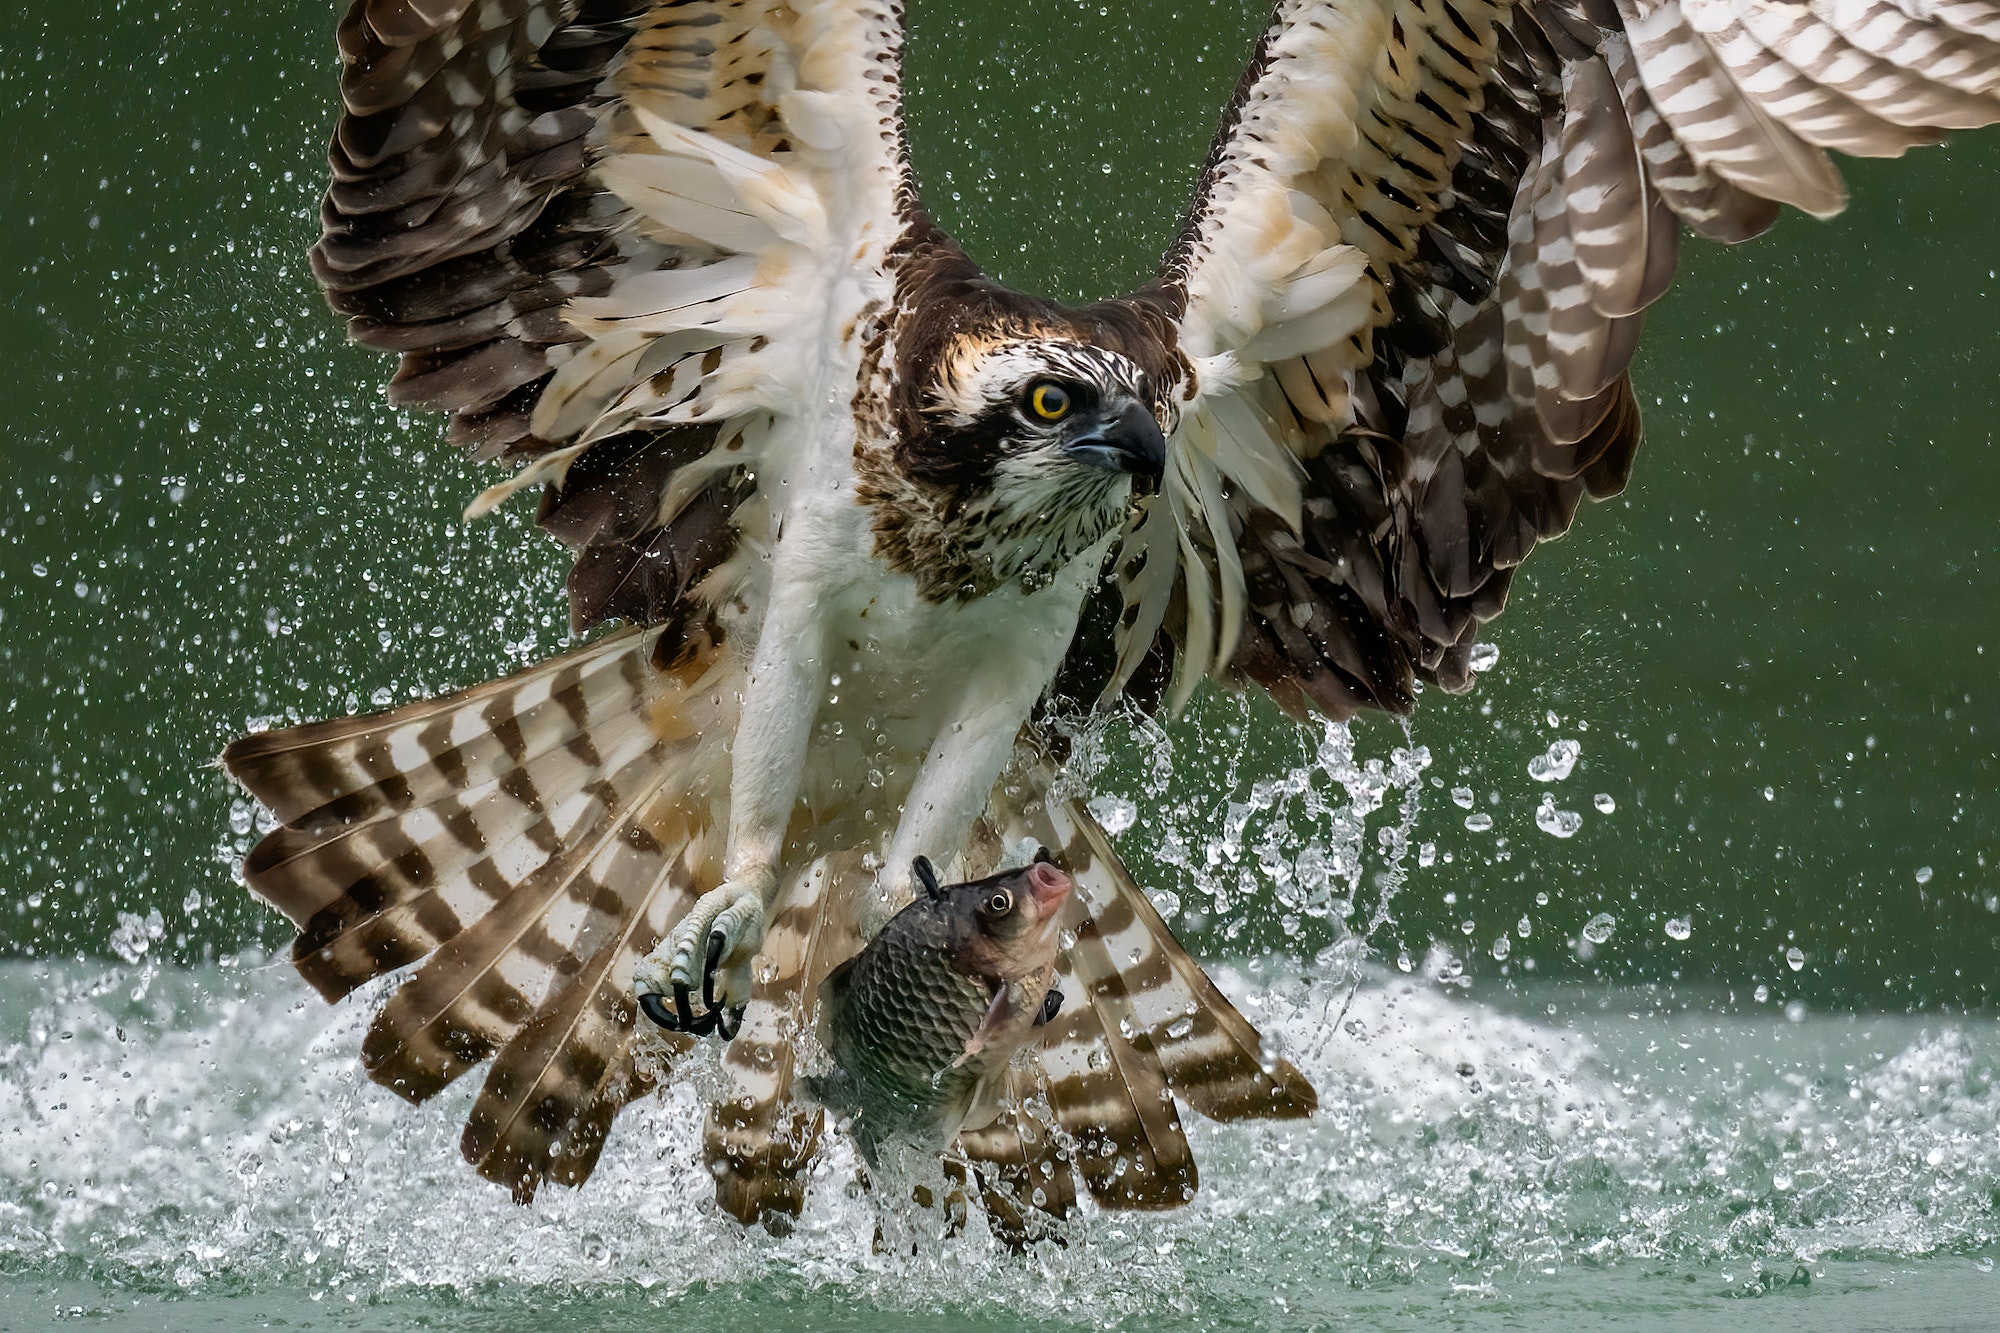 Amazing picture of an osprey or sea hawk hunting a fish from the water